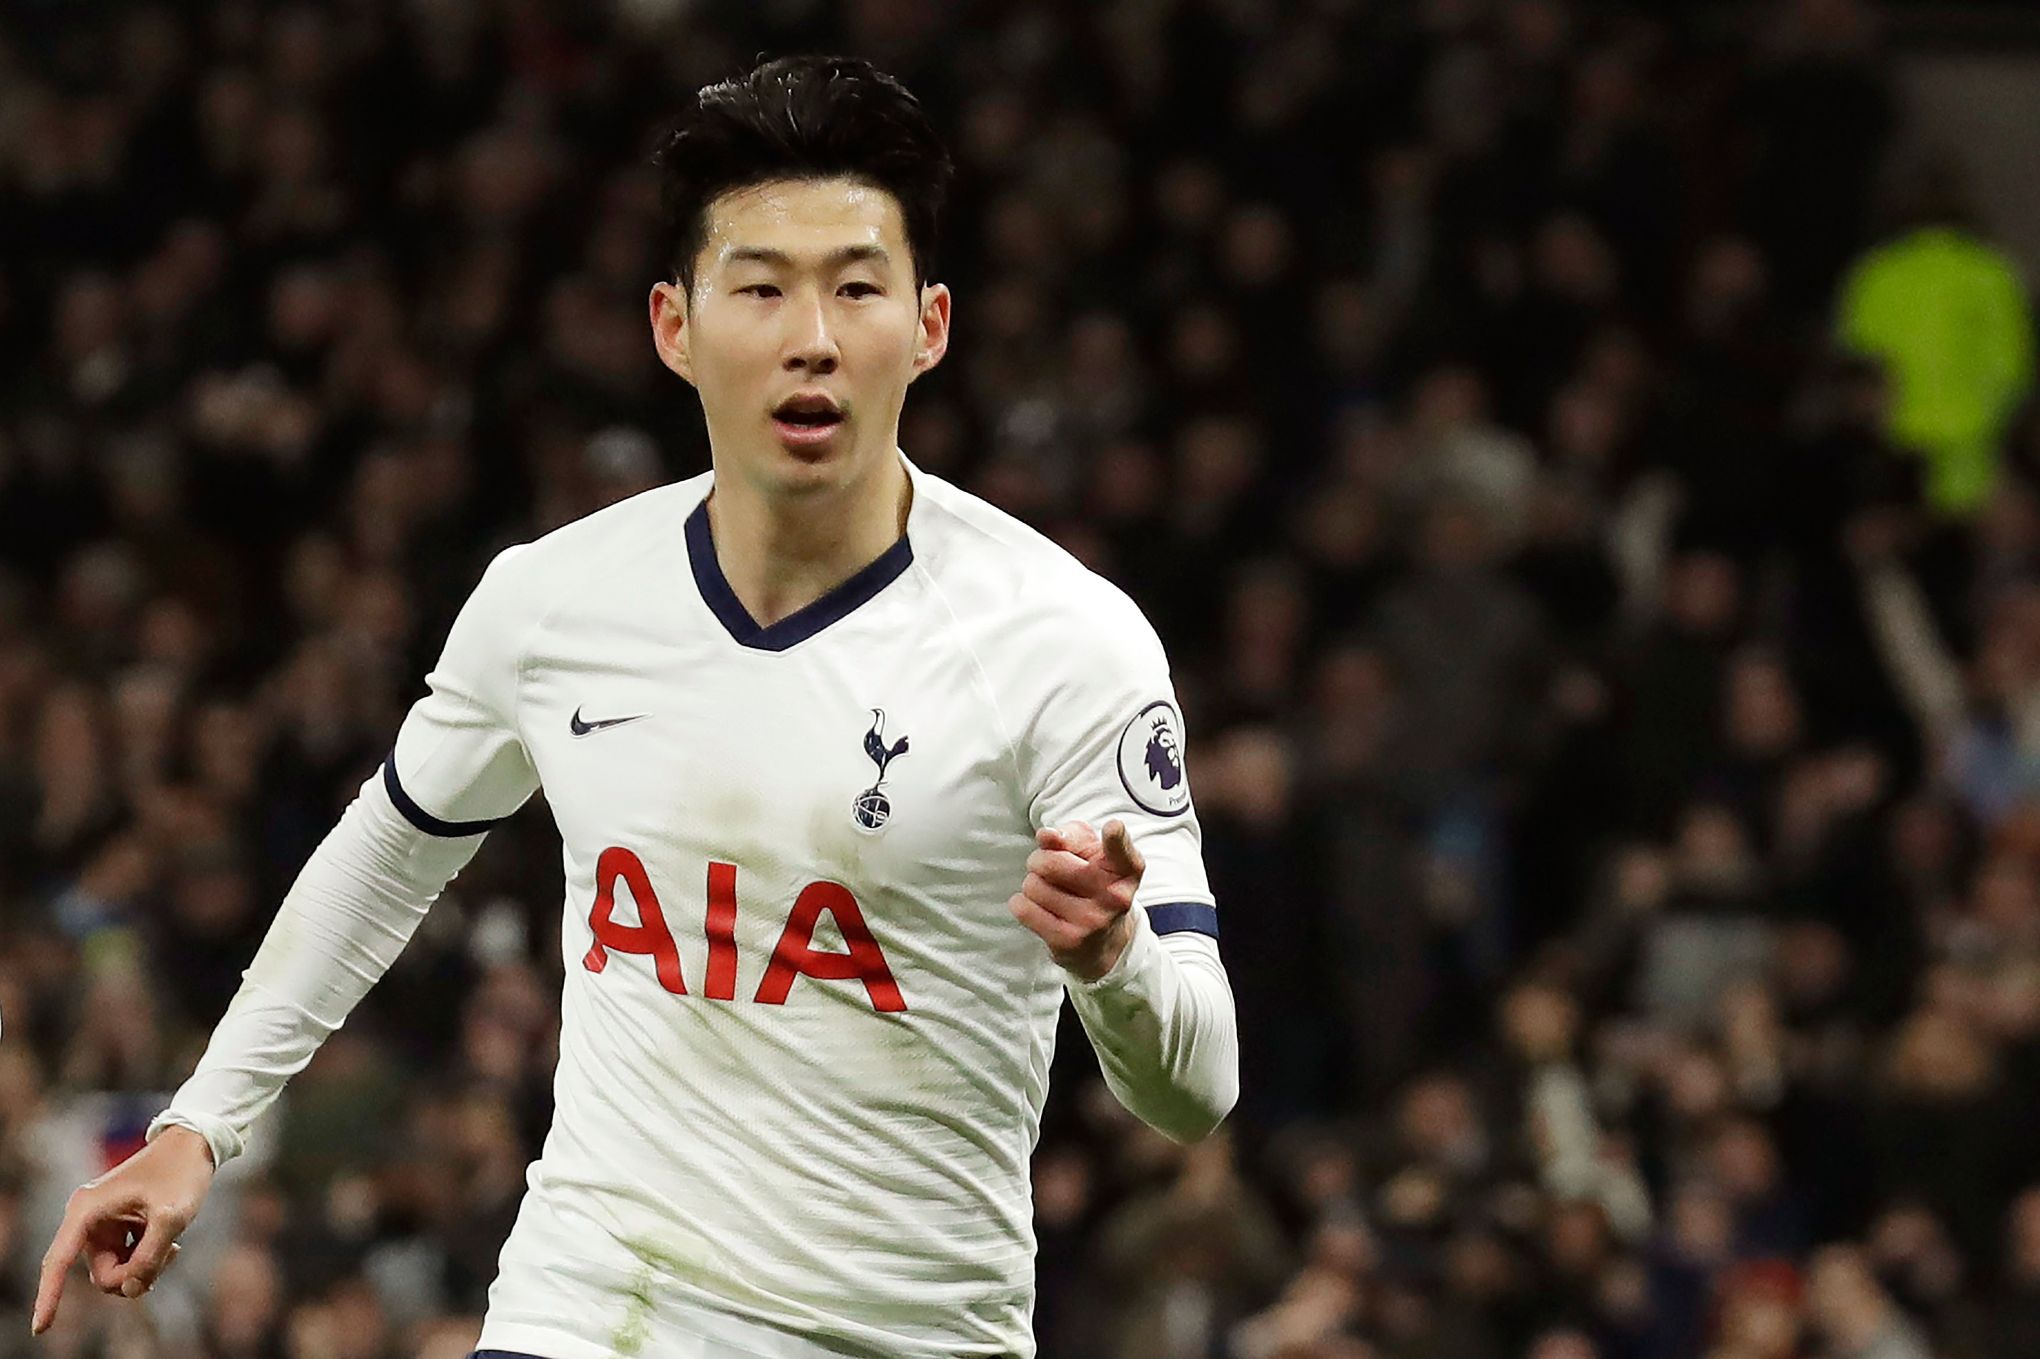 Son Heung-min reports to marines boot camp in South Korea to begin